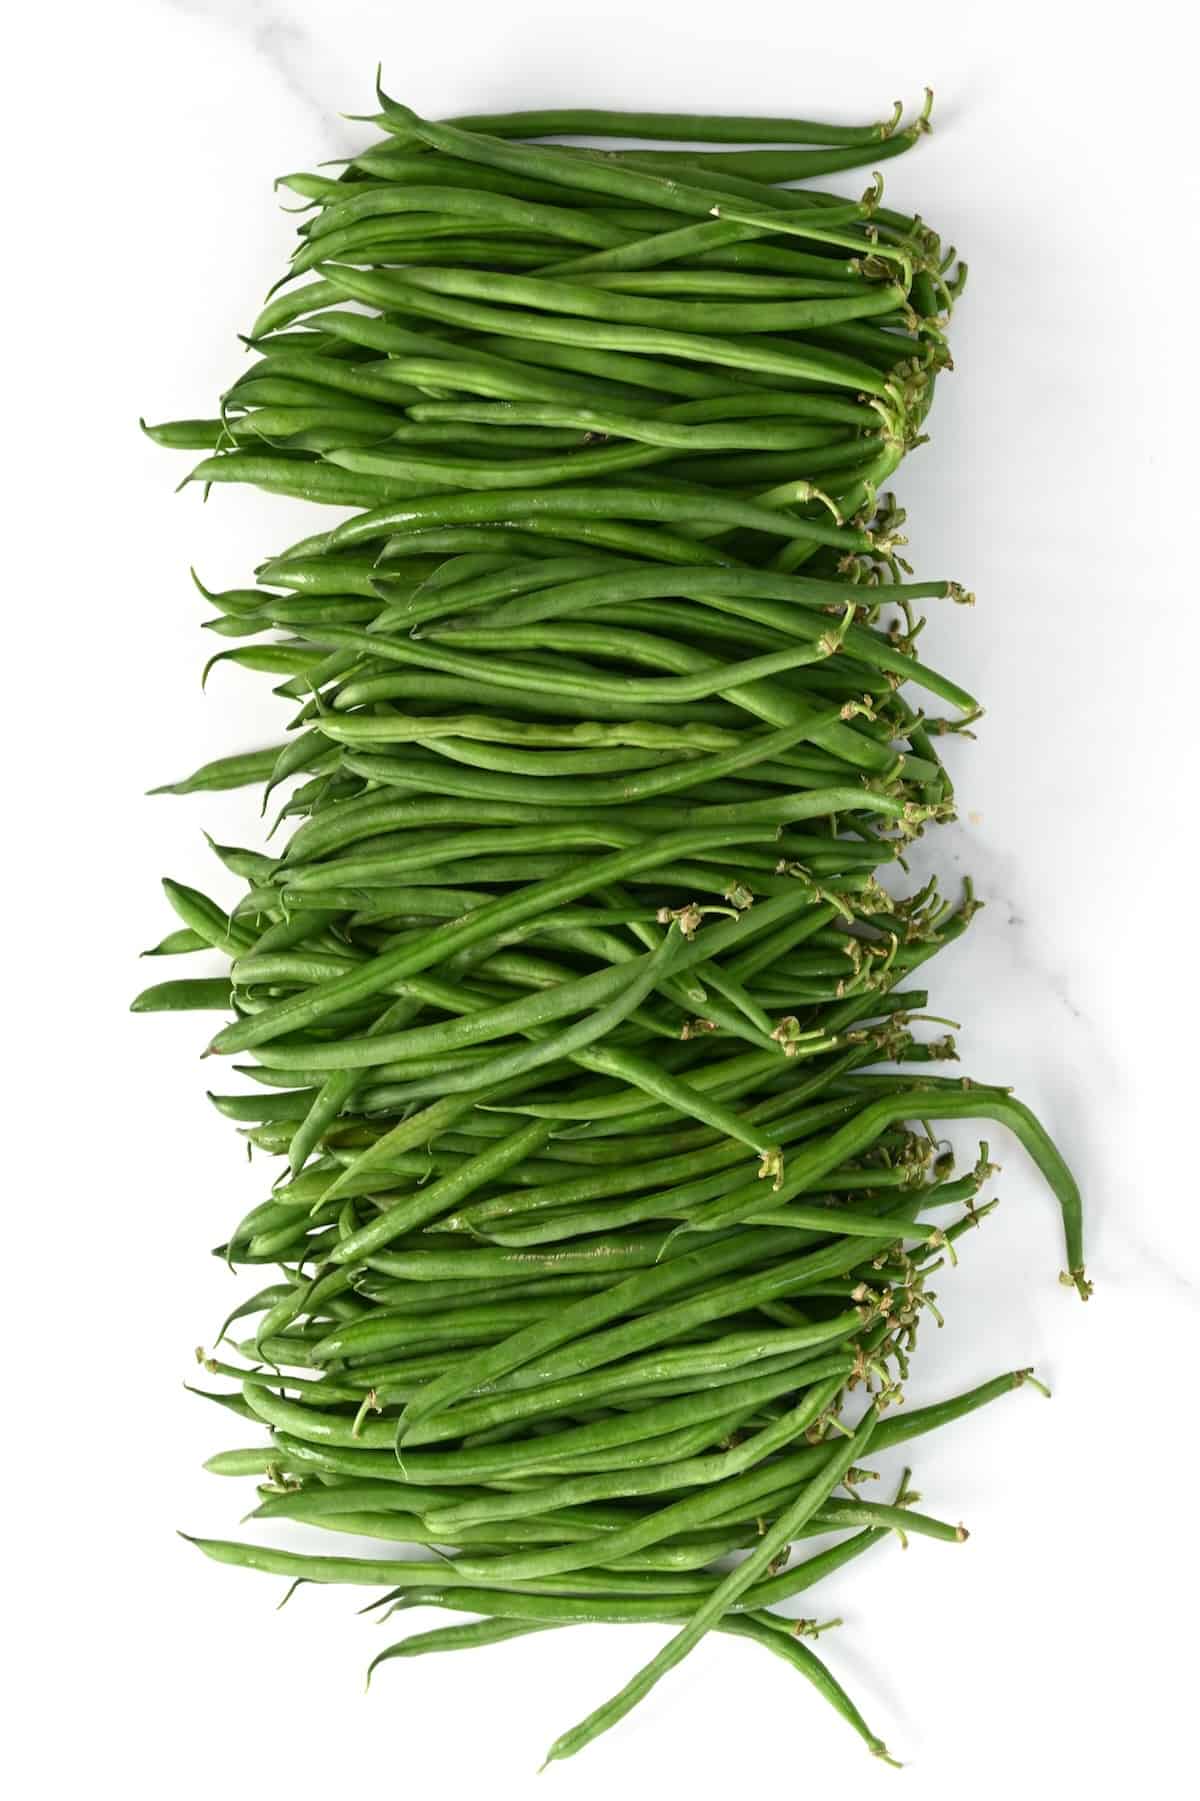 Green beans on a flat surface